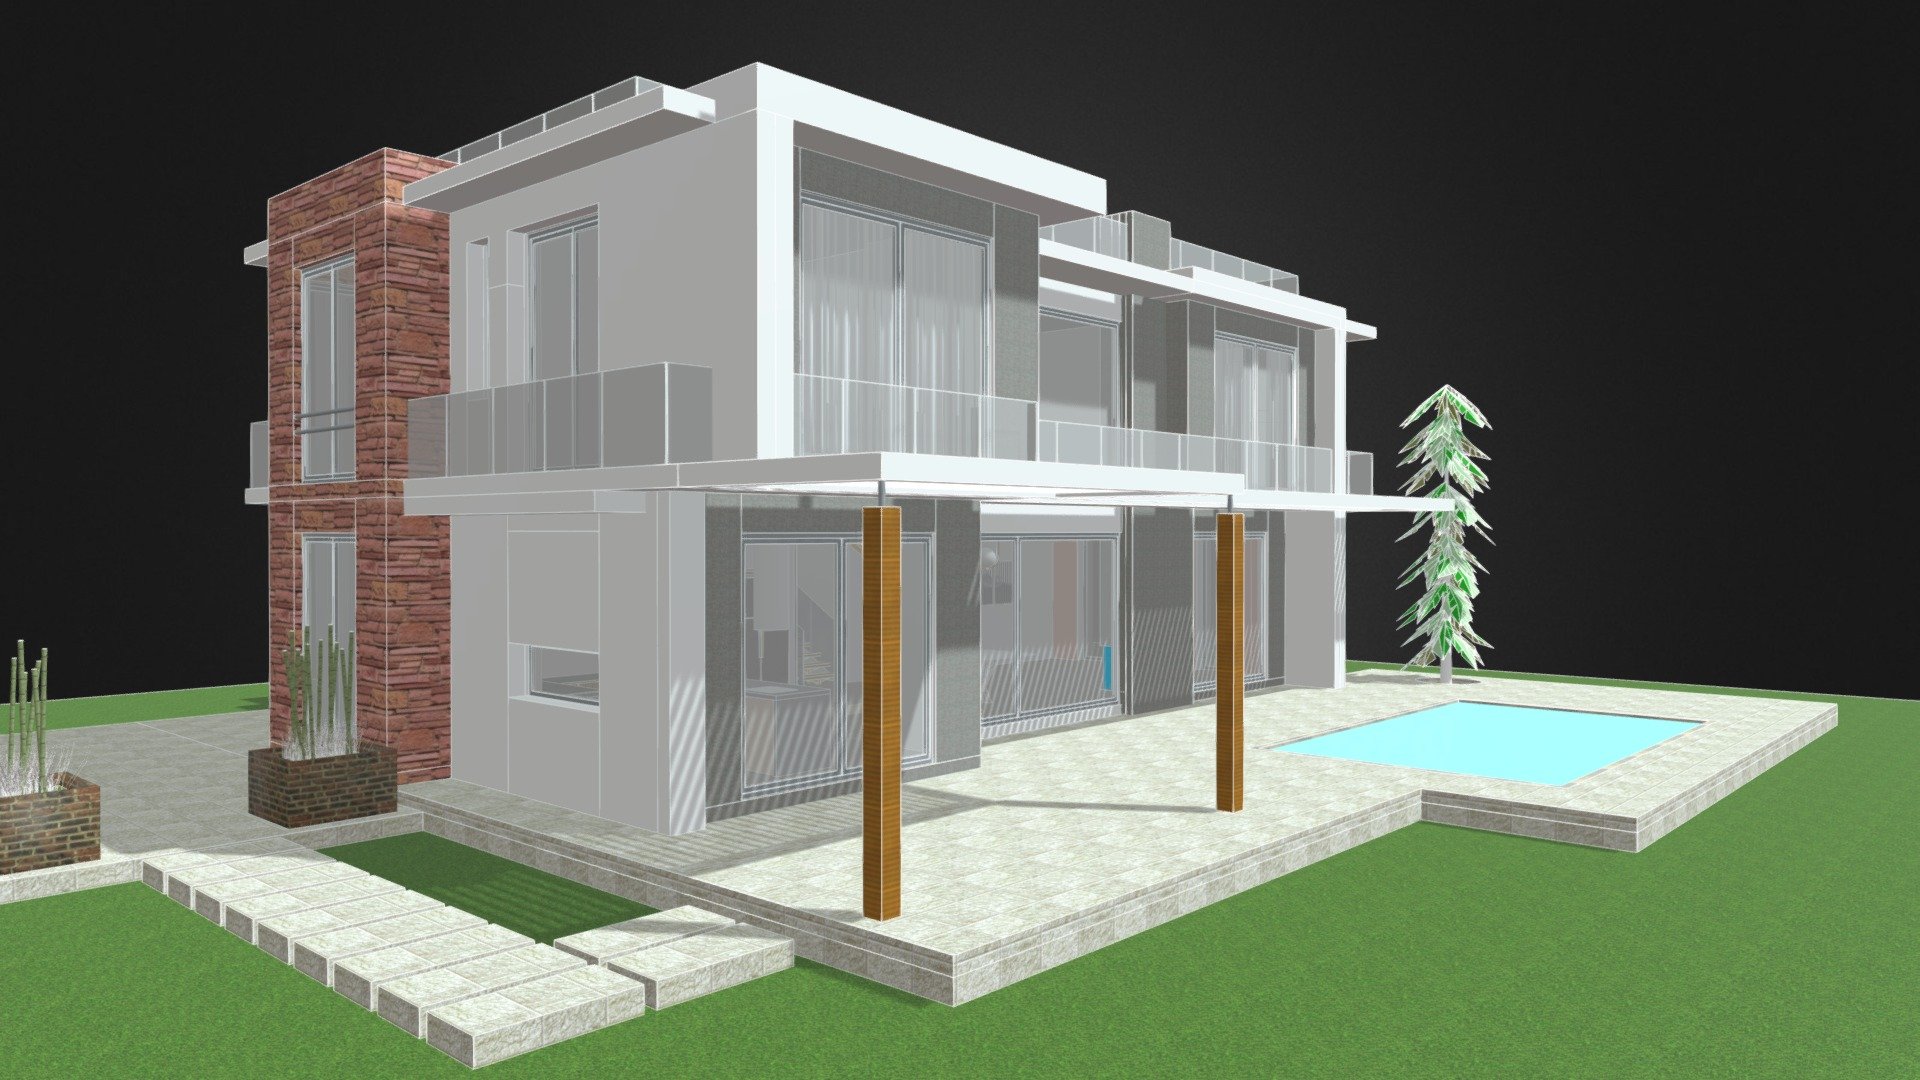 If you have any question, contact me!

This project was created by SketchUp. You will have DWG files and Render files too 3d model